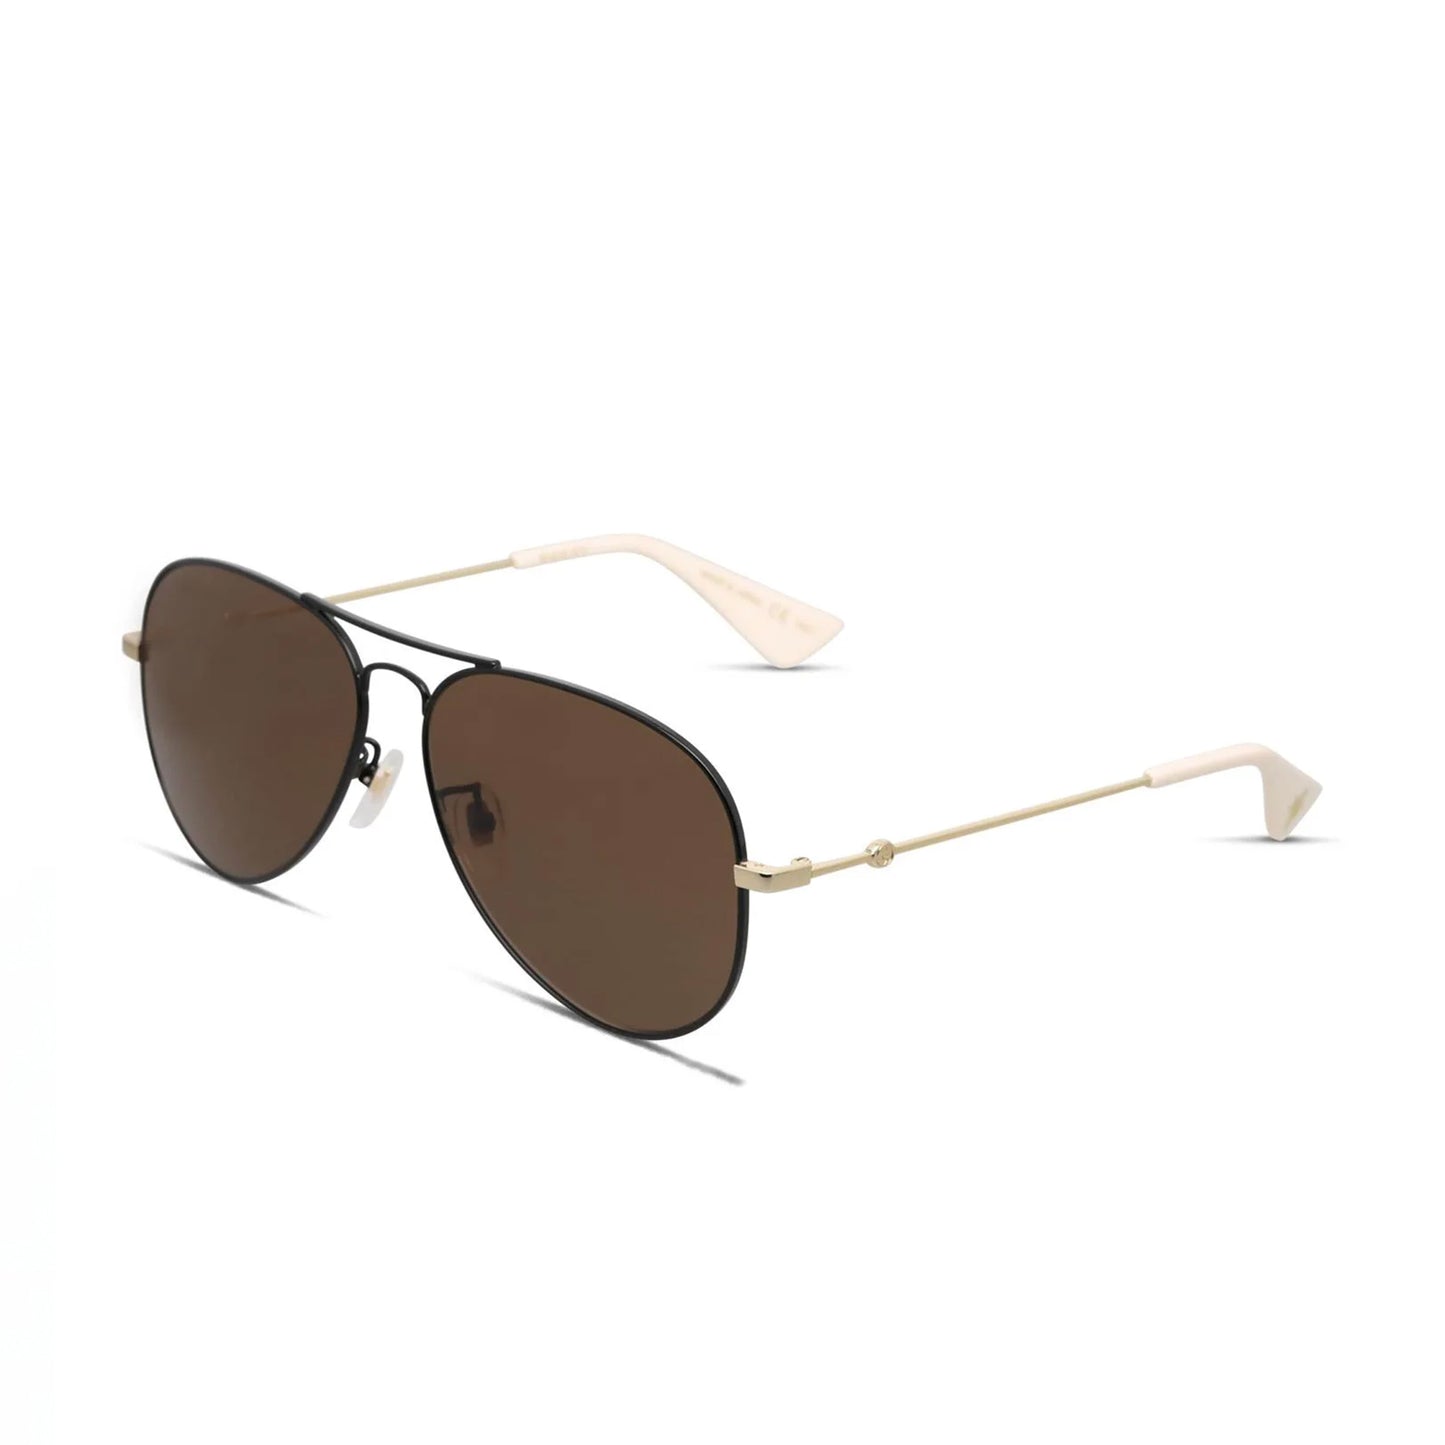 Gucci Fashion Sunglasses MSRP $465. The Gucci sunglasses are a classic aviator frame dripping in luxurious cool. Crafted from high-grade metal, it features a classic tear-drop shape, refined temples, and adjustable nose pads for a snug fit